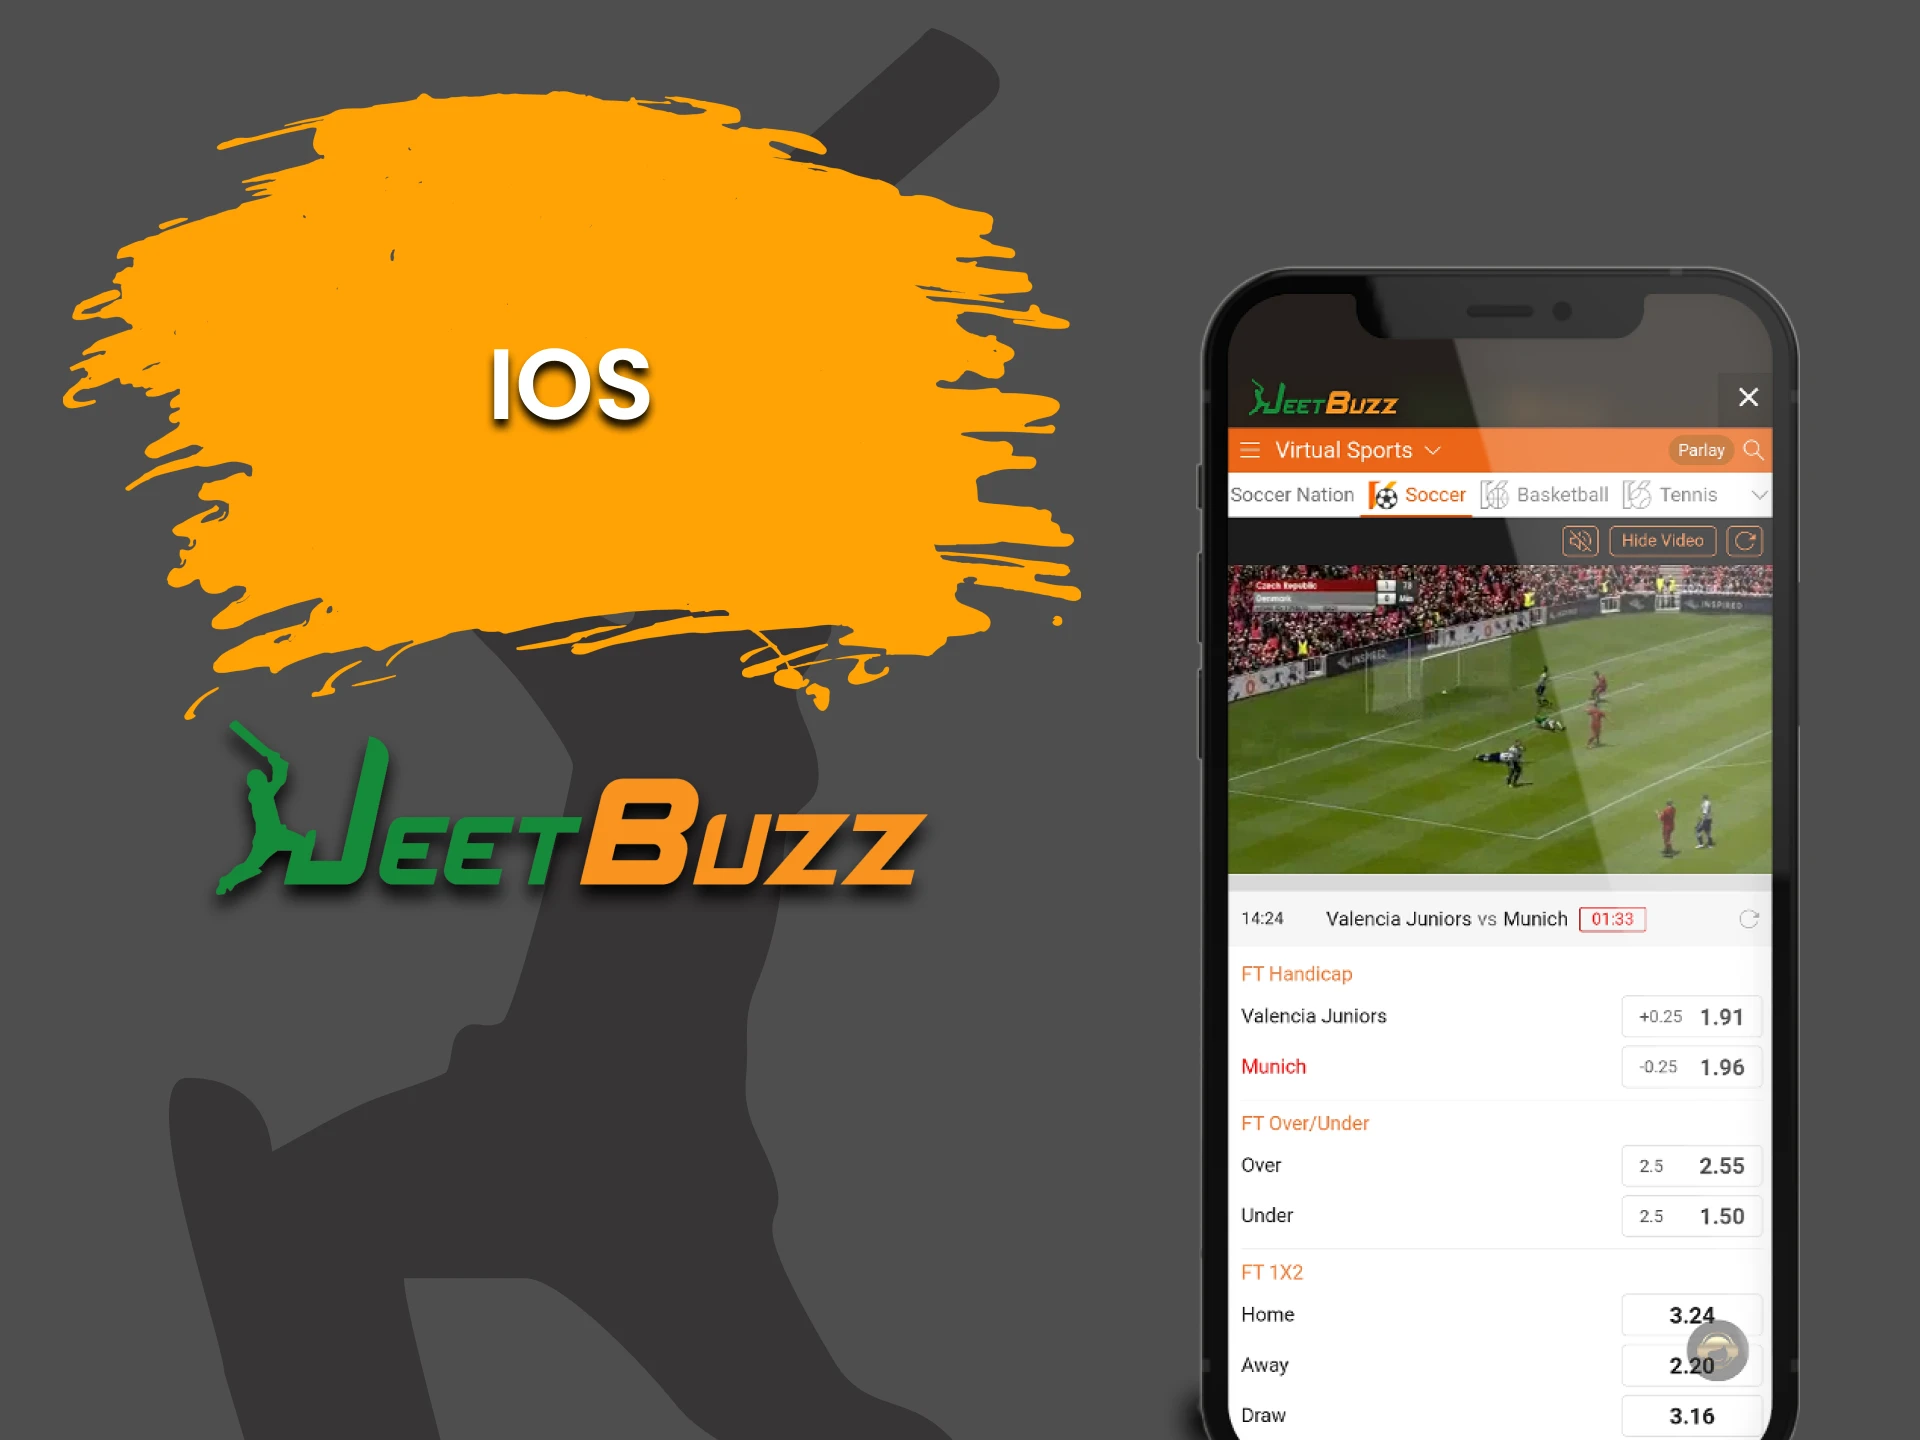 Bet on virtual sports with the JeetBuzz iOS app.